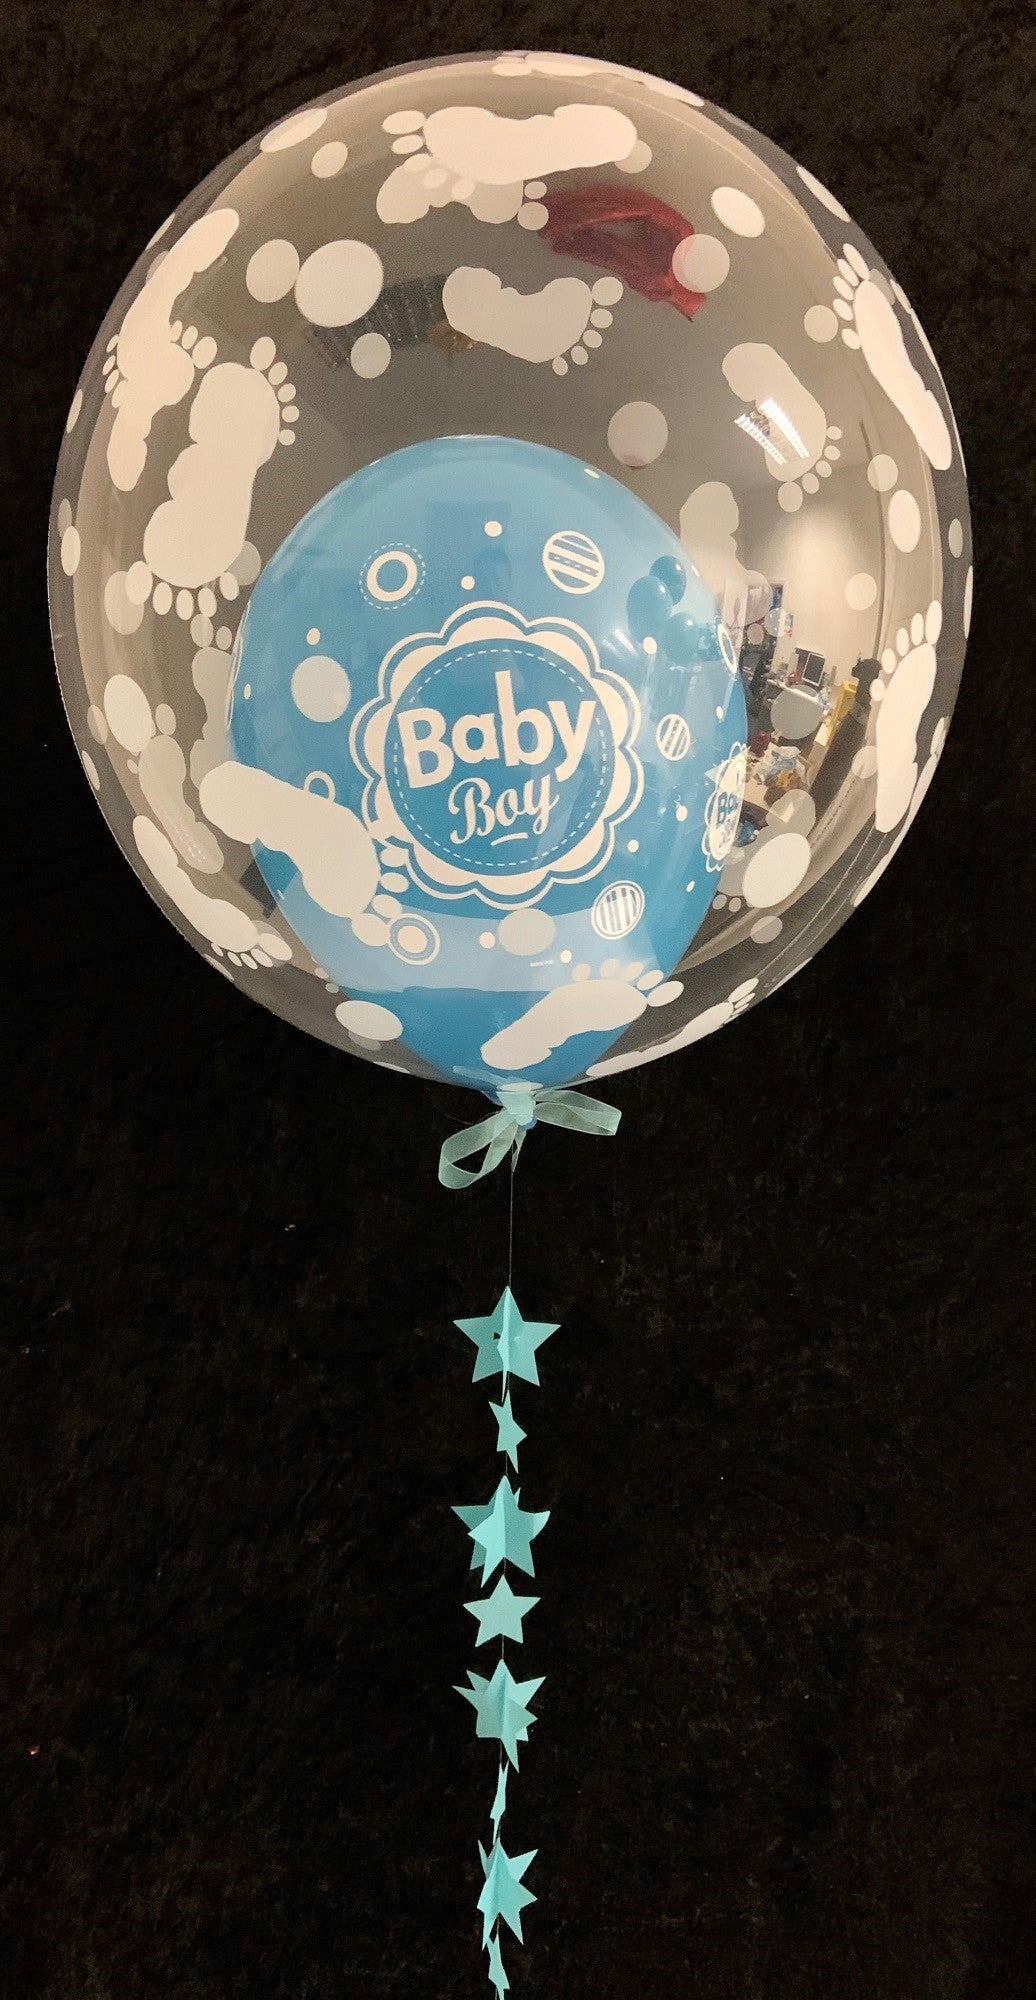 New Baby Bubble Balloon in a Box